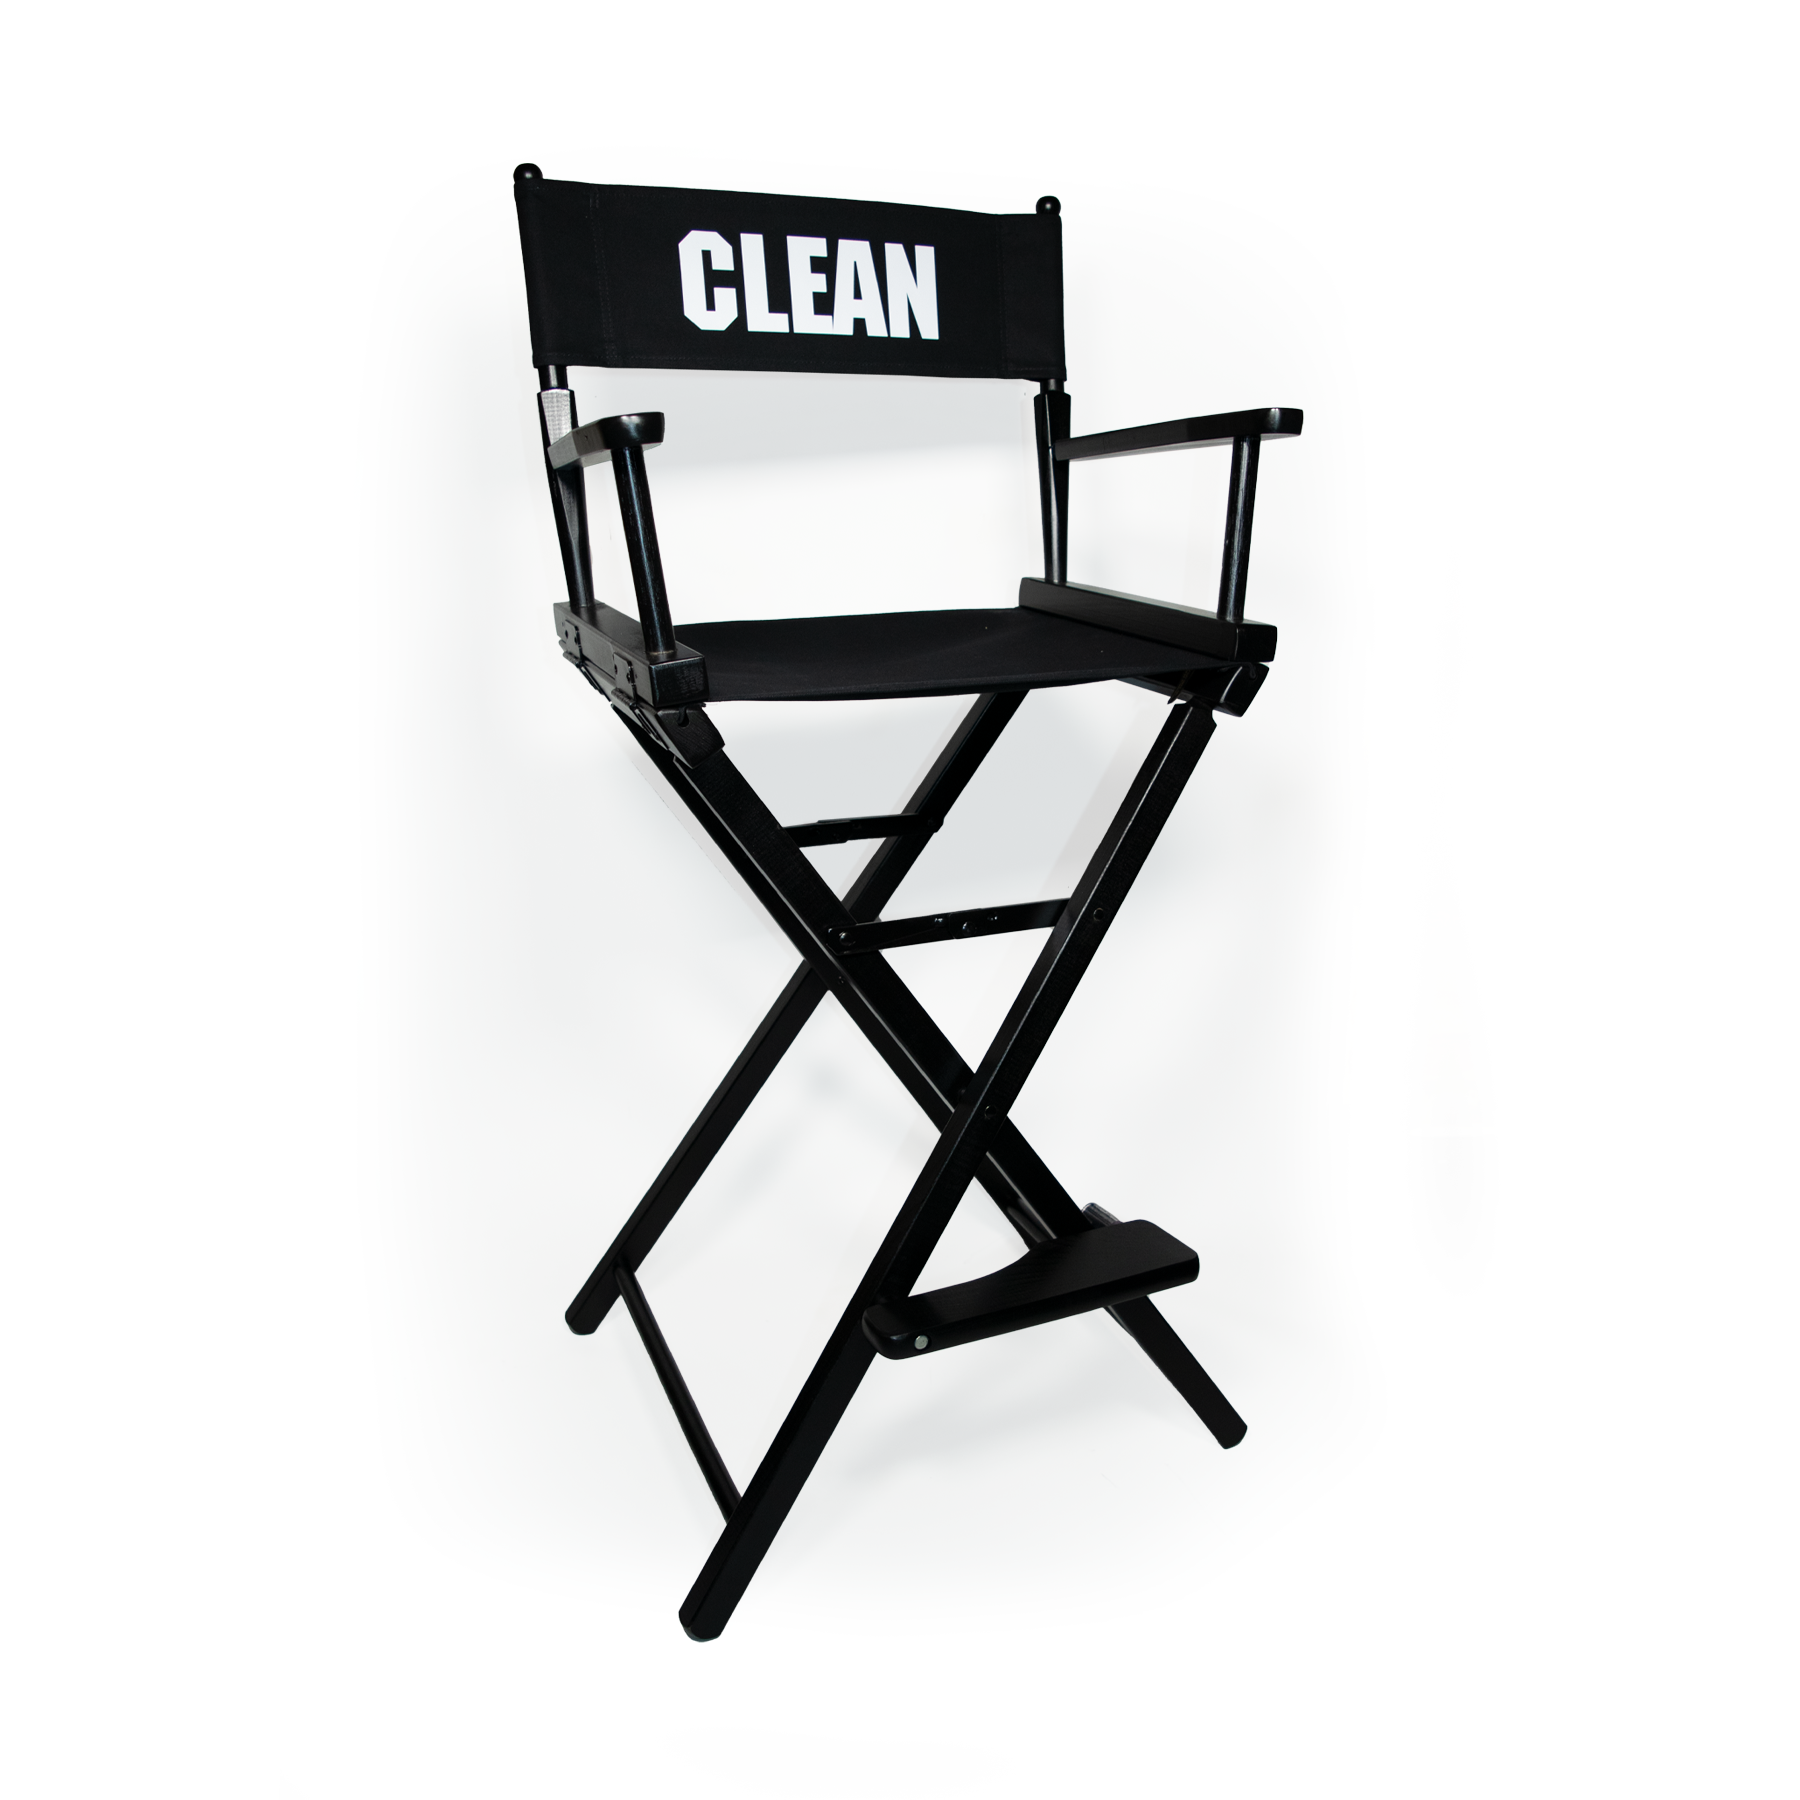 The Directors Chair